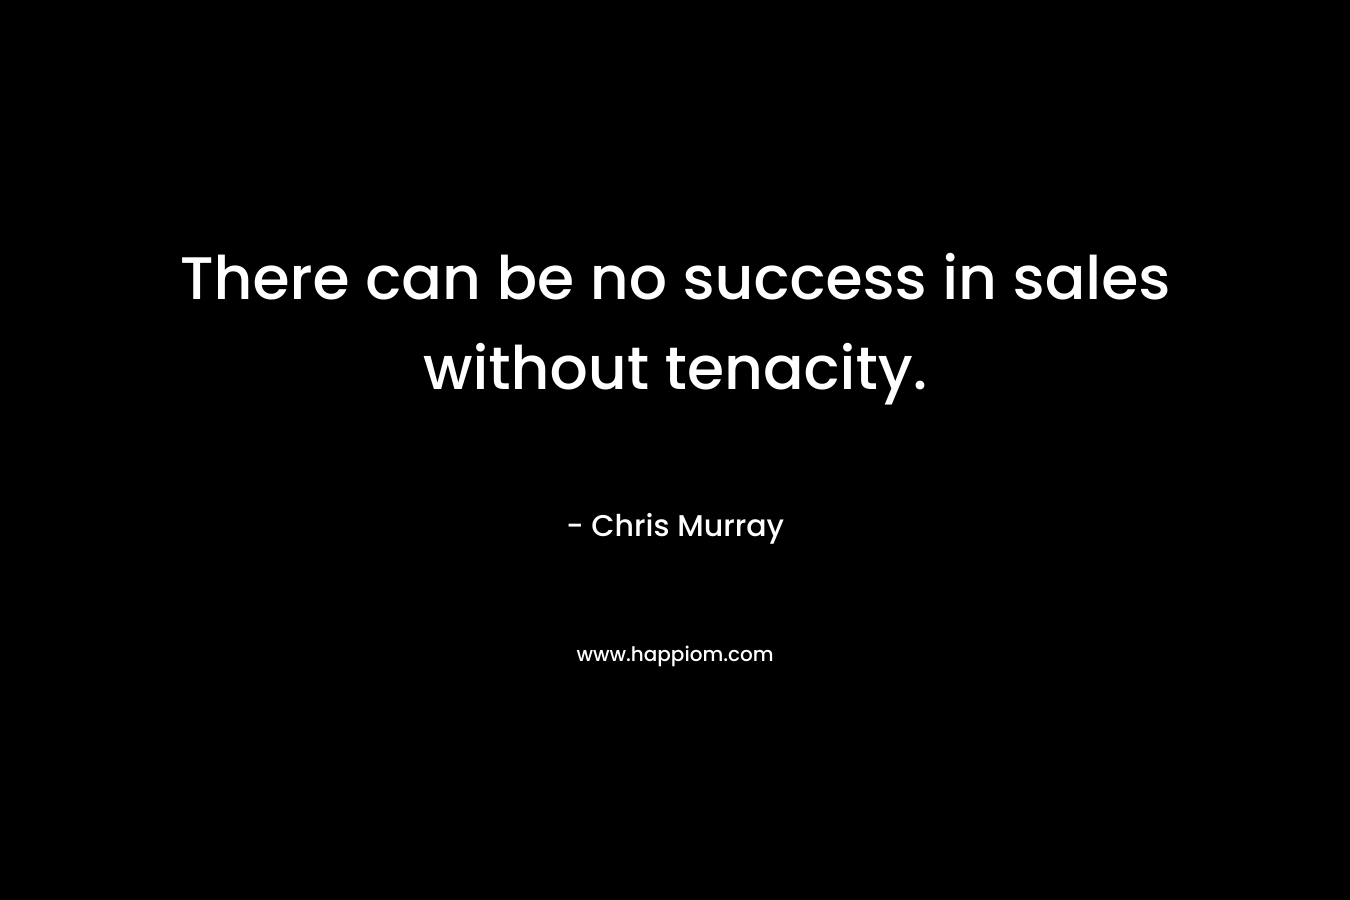 There can be no success in sales without tenacity.